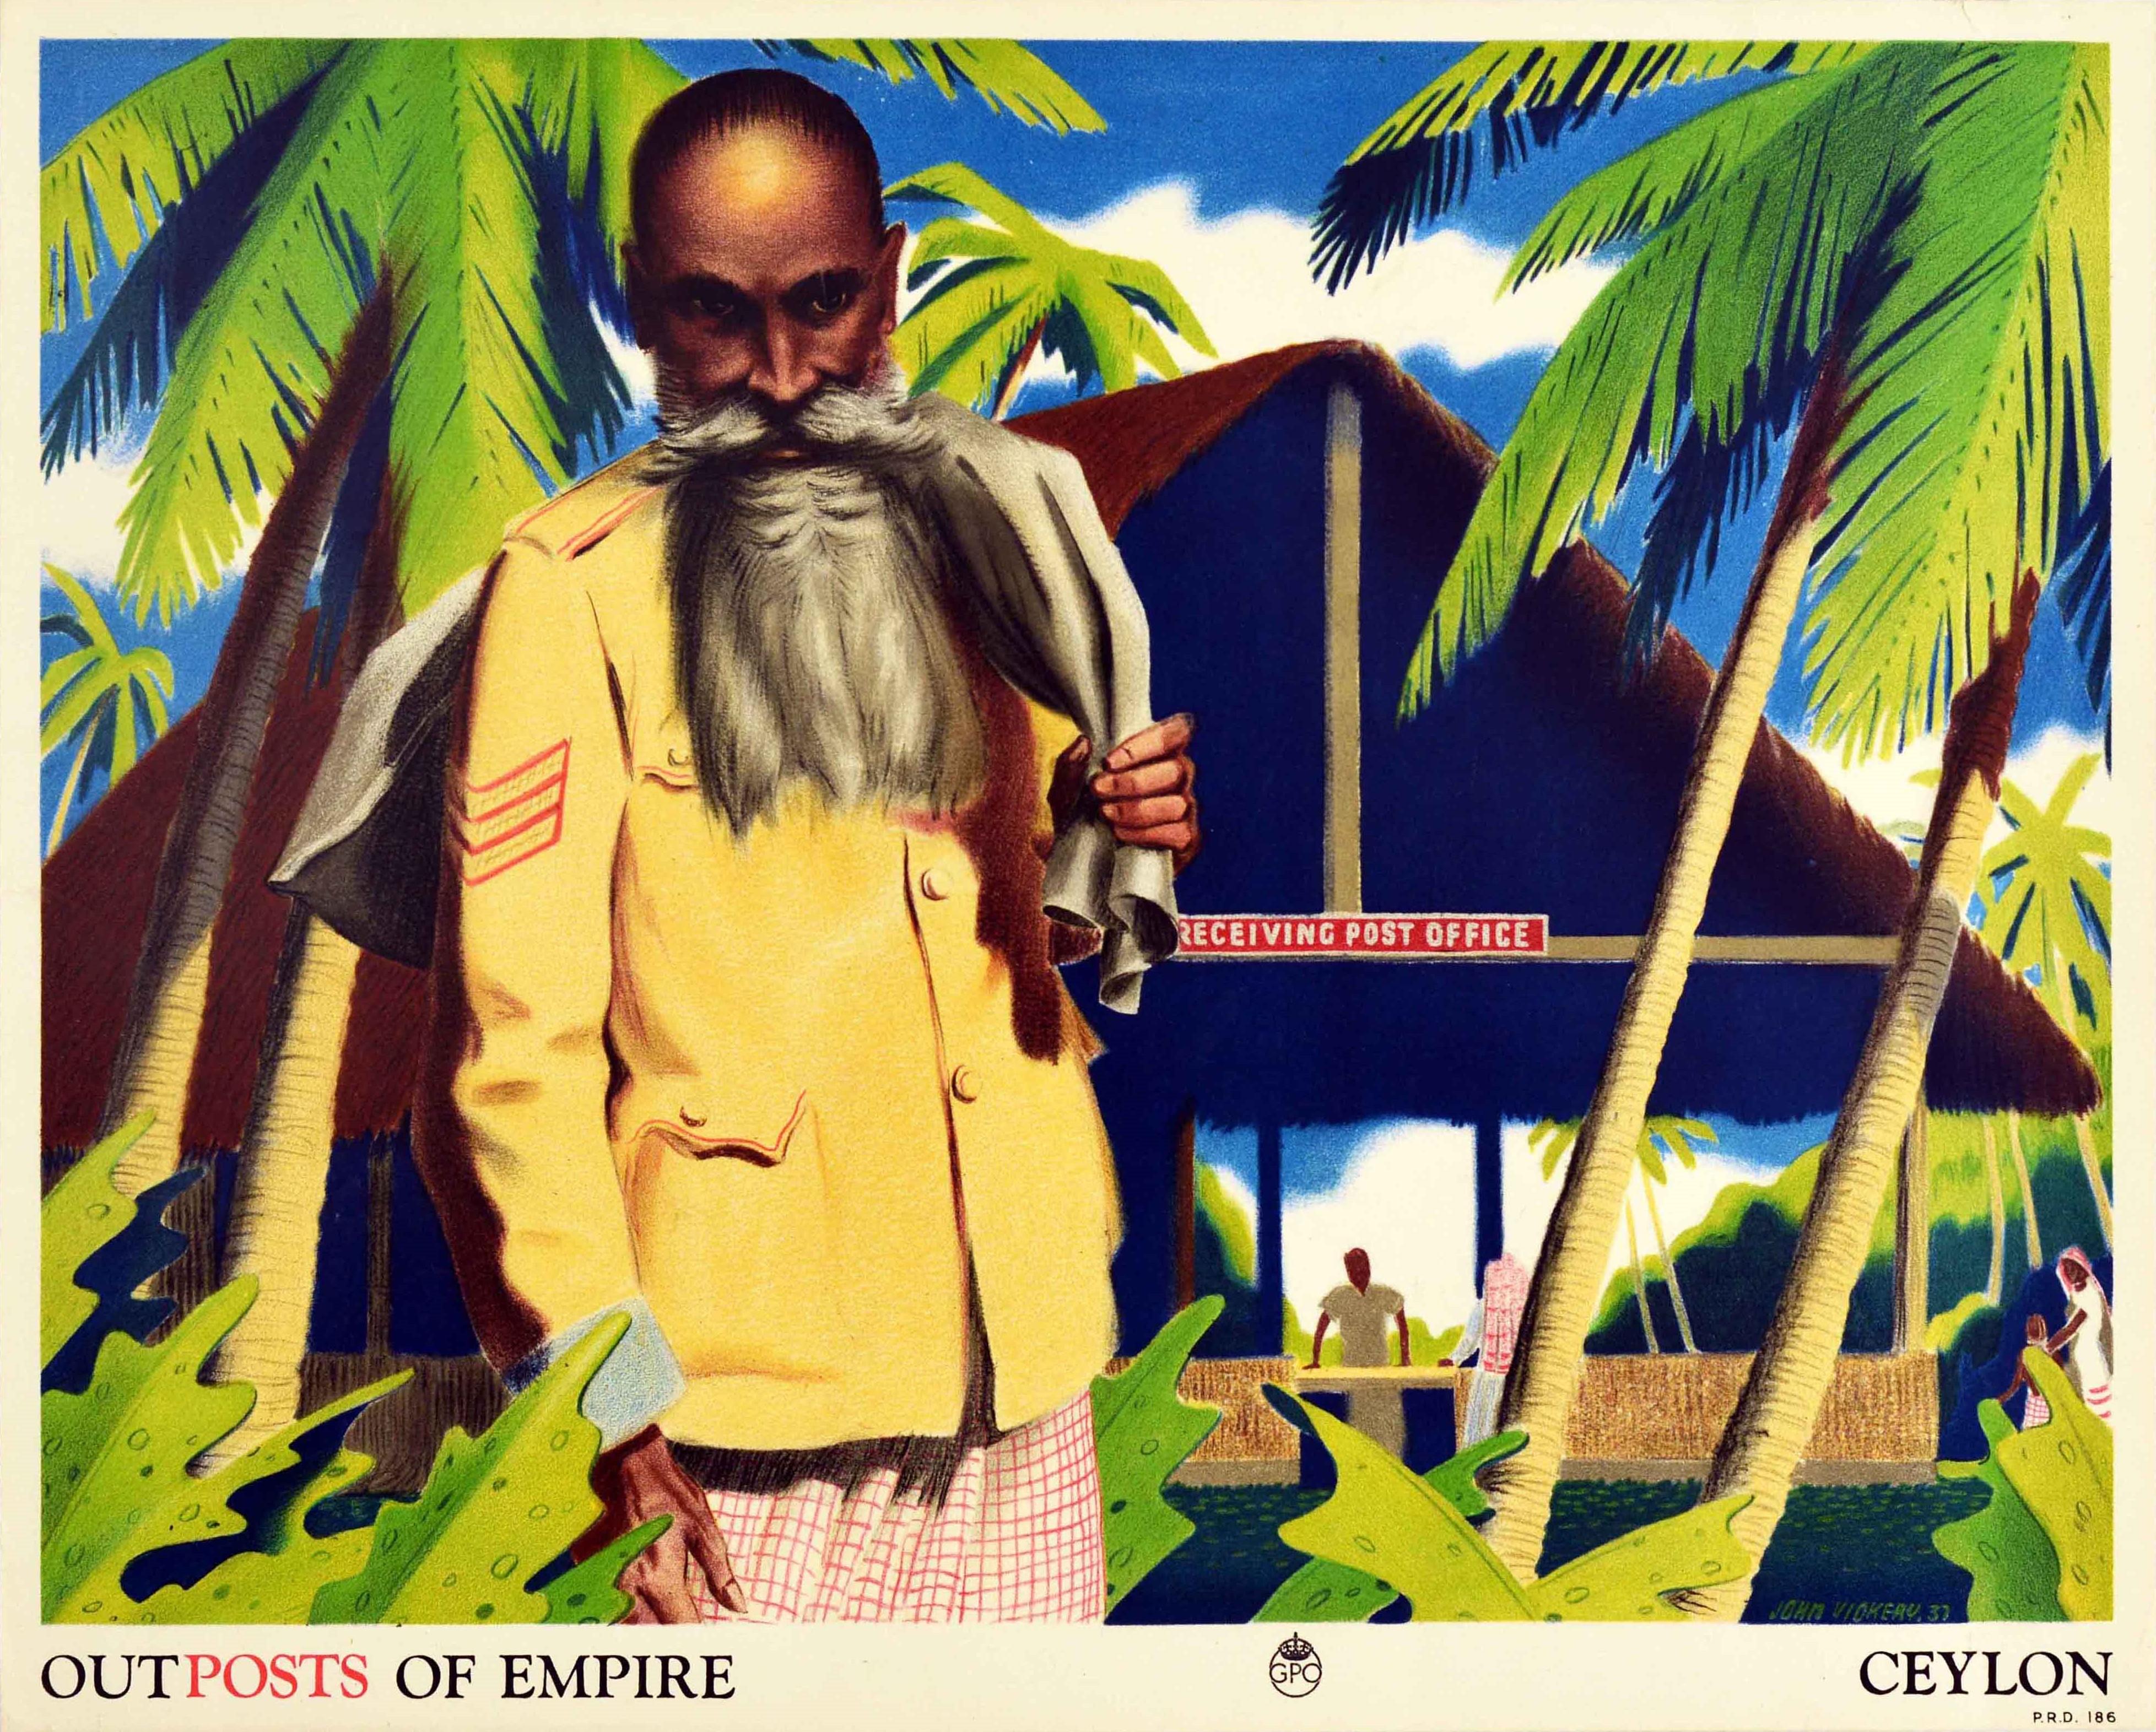 Original vintage advertising poster published by the GPO General Post Office for schools to promote the extensive reach of its postal services - Outposts of Empire Ceylon (Sri Lanka). Colourful illustration by the Australian artist John Vickery